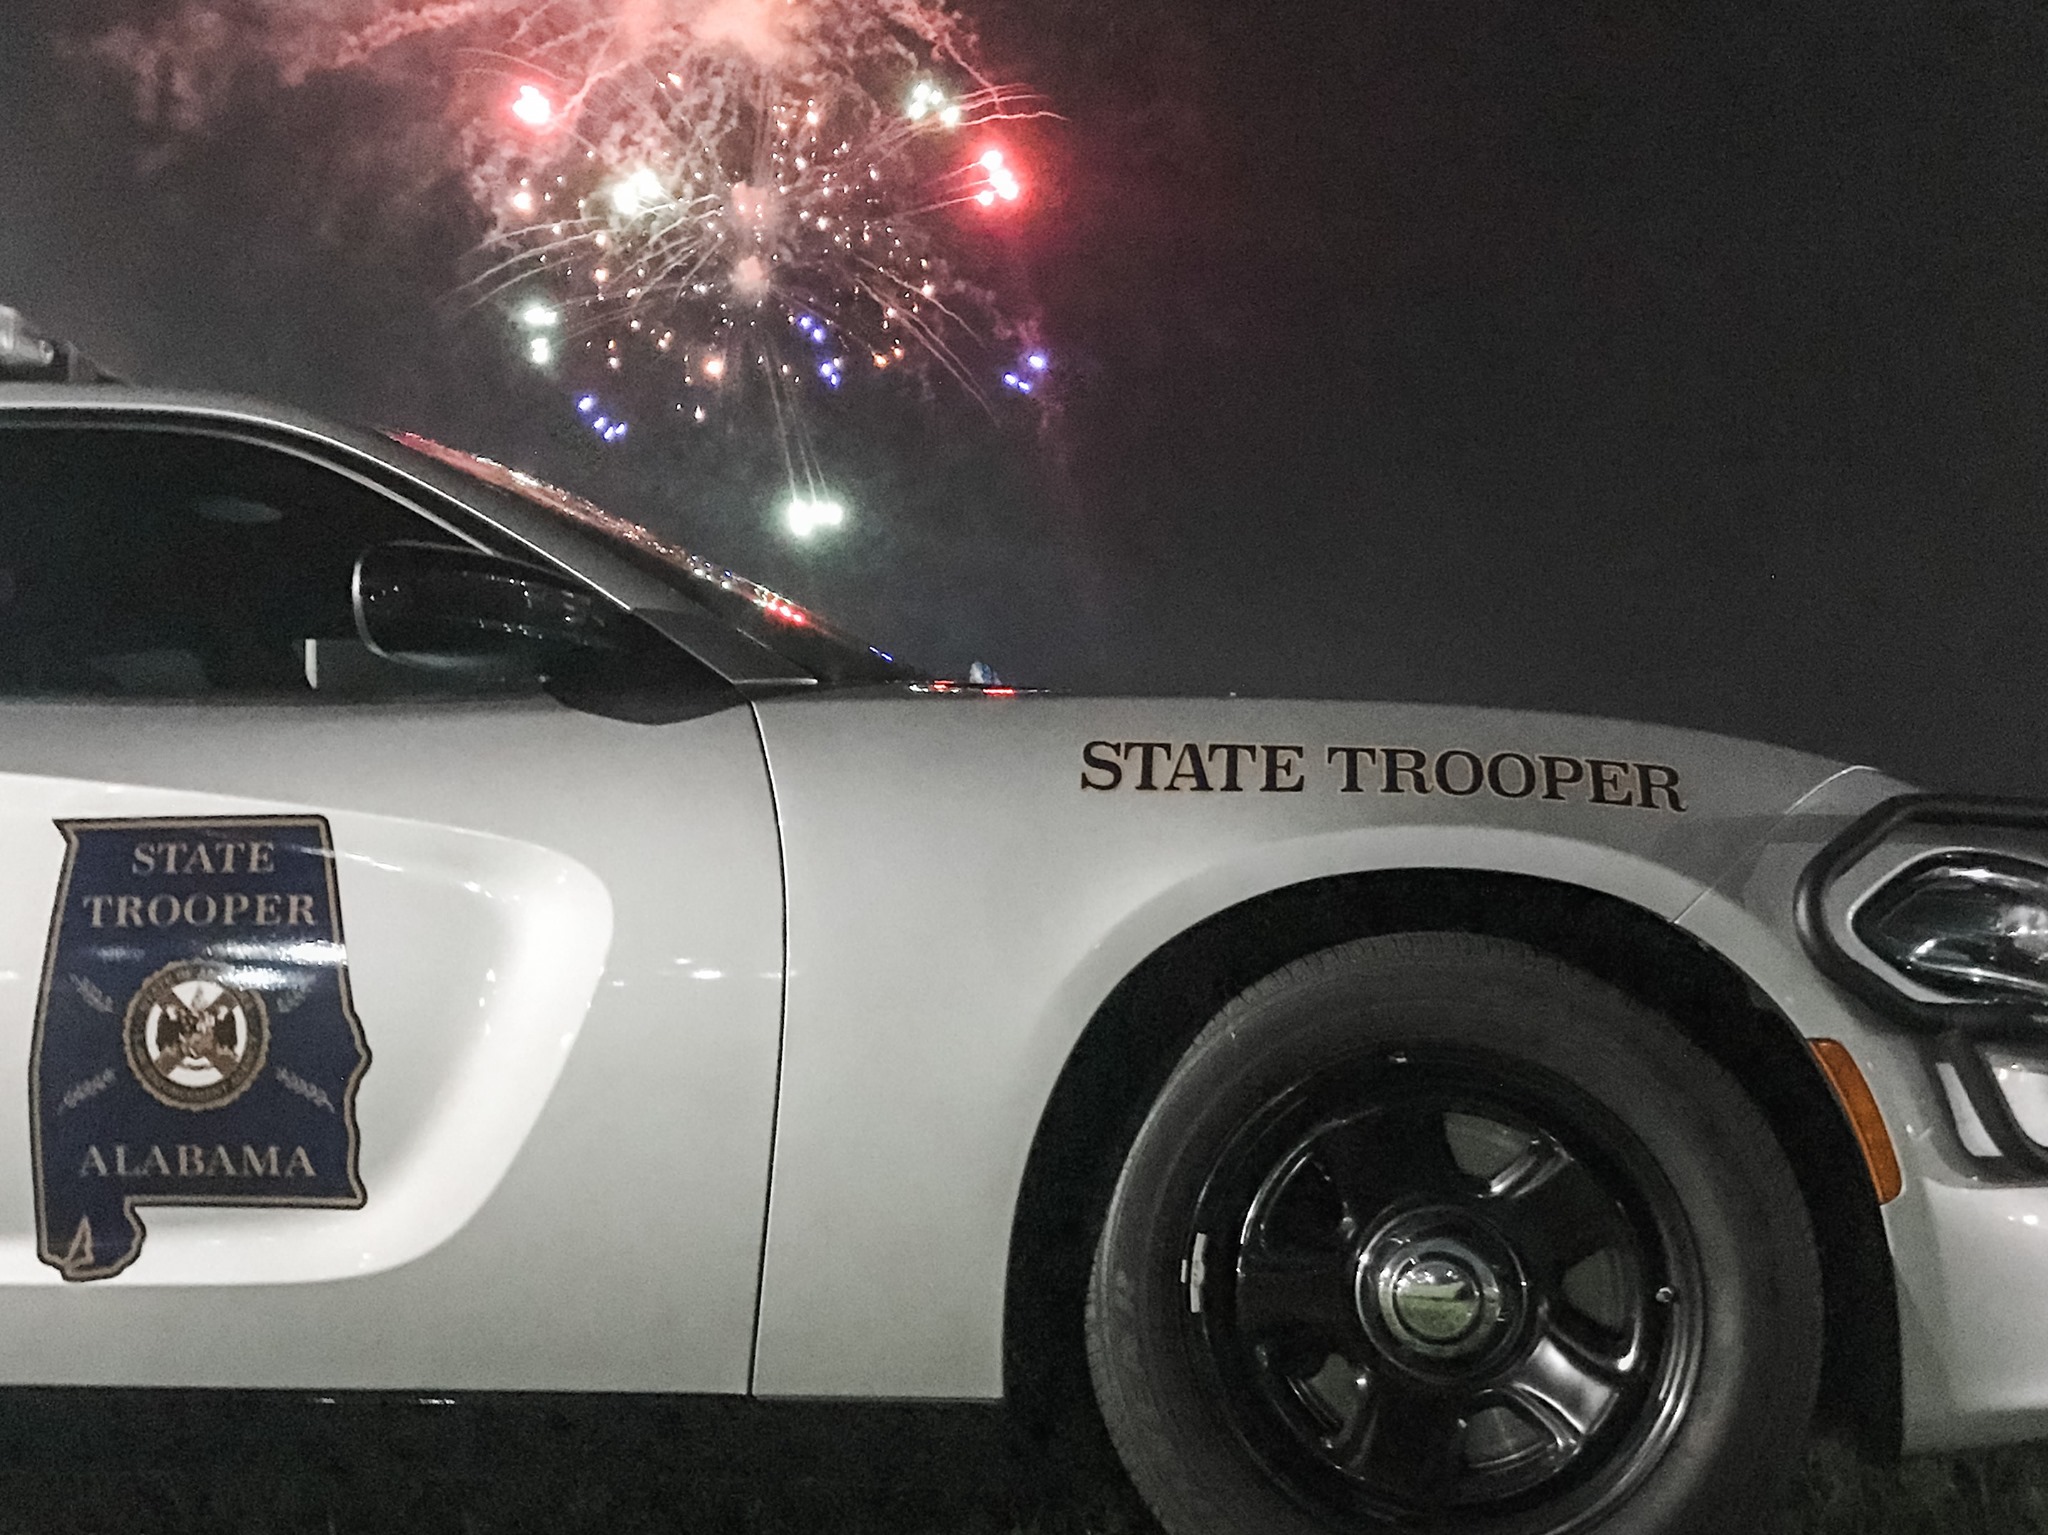 ALEA: ‘Stay Alive, Think Before You Drive’ this Fourth of July